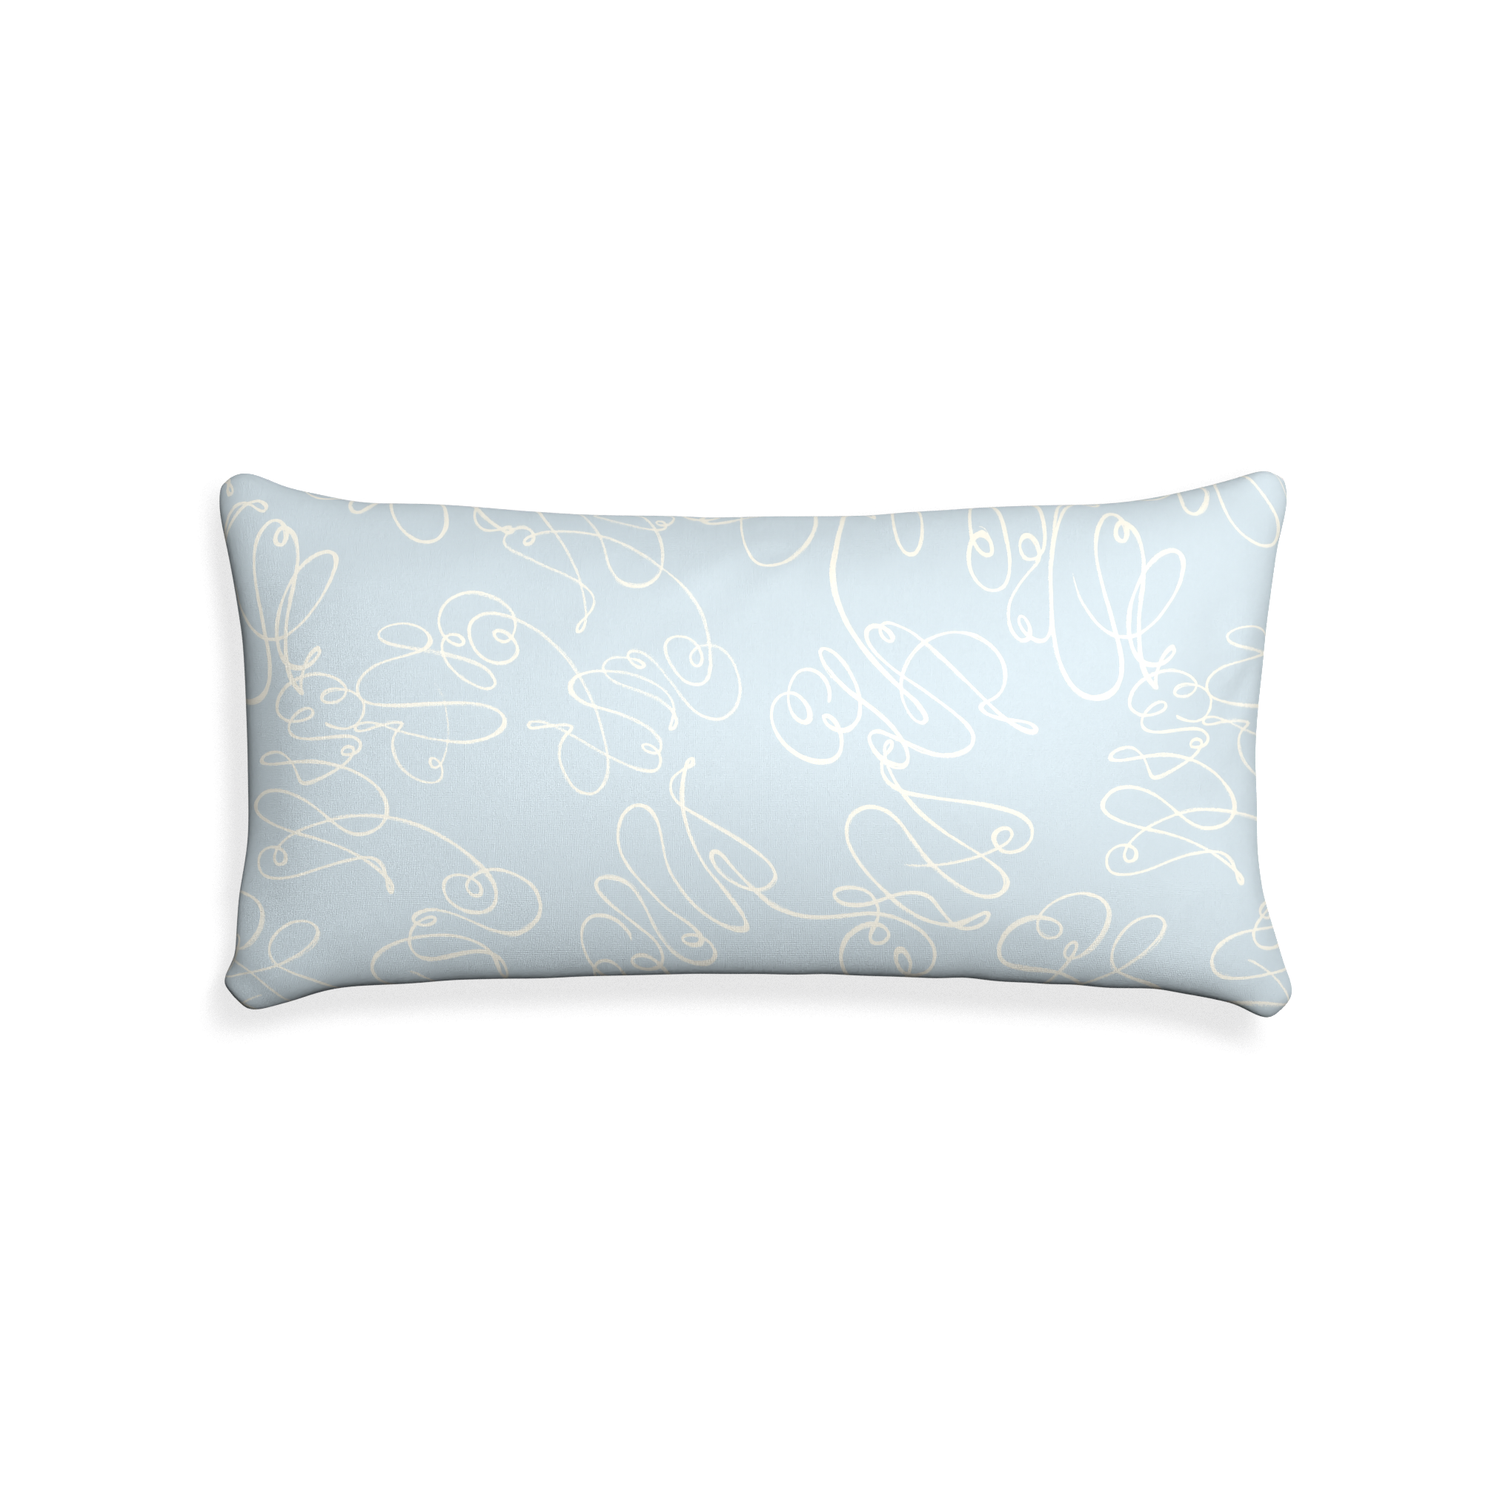 Midi-lumbar mirabella custom powder blue abstractpillow with none on white background